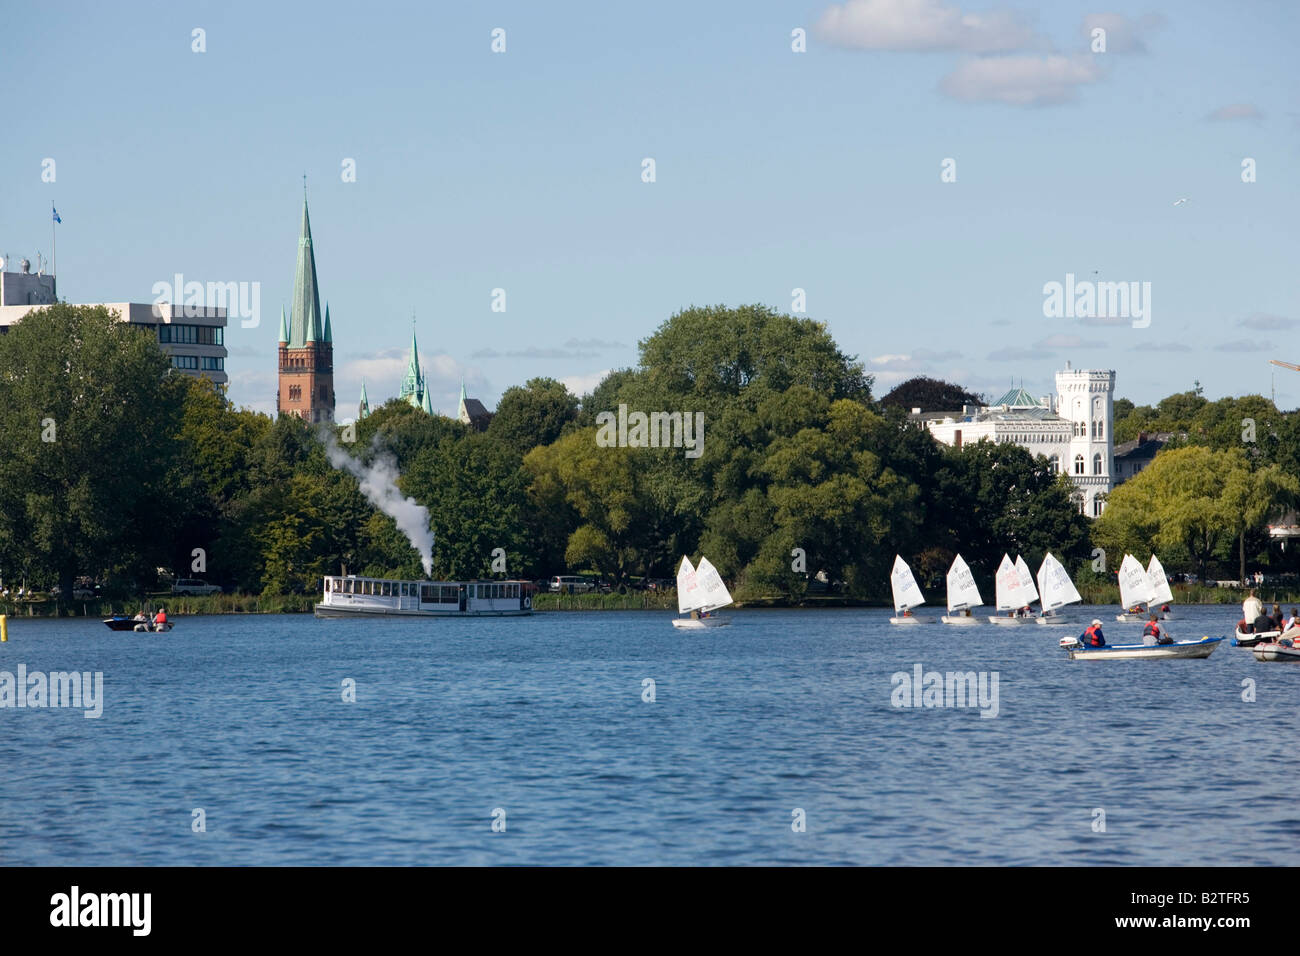 A lot of yawls on lake Alster, A lot of yawls on lake Alster, Hamburg, Germany Stock Photo